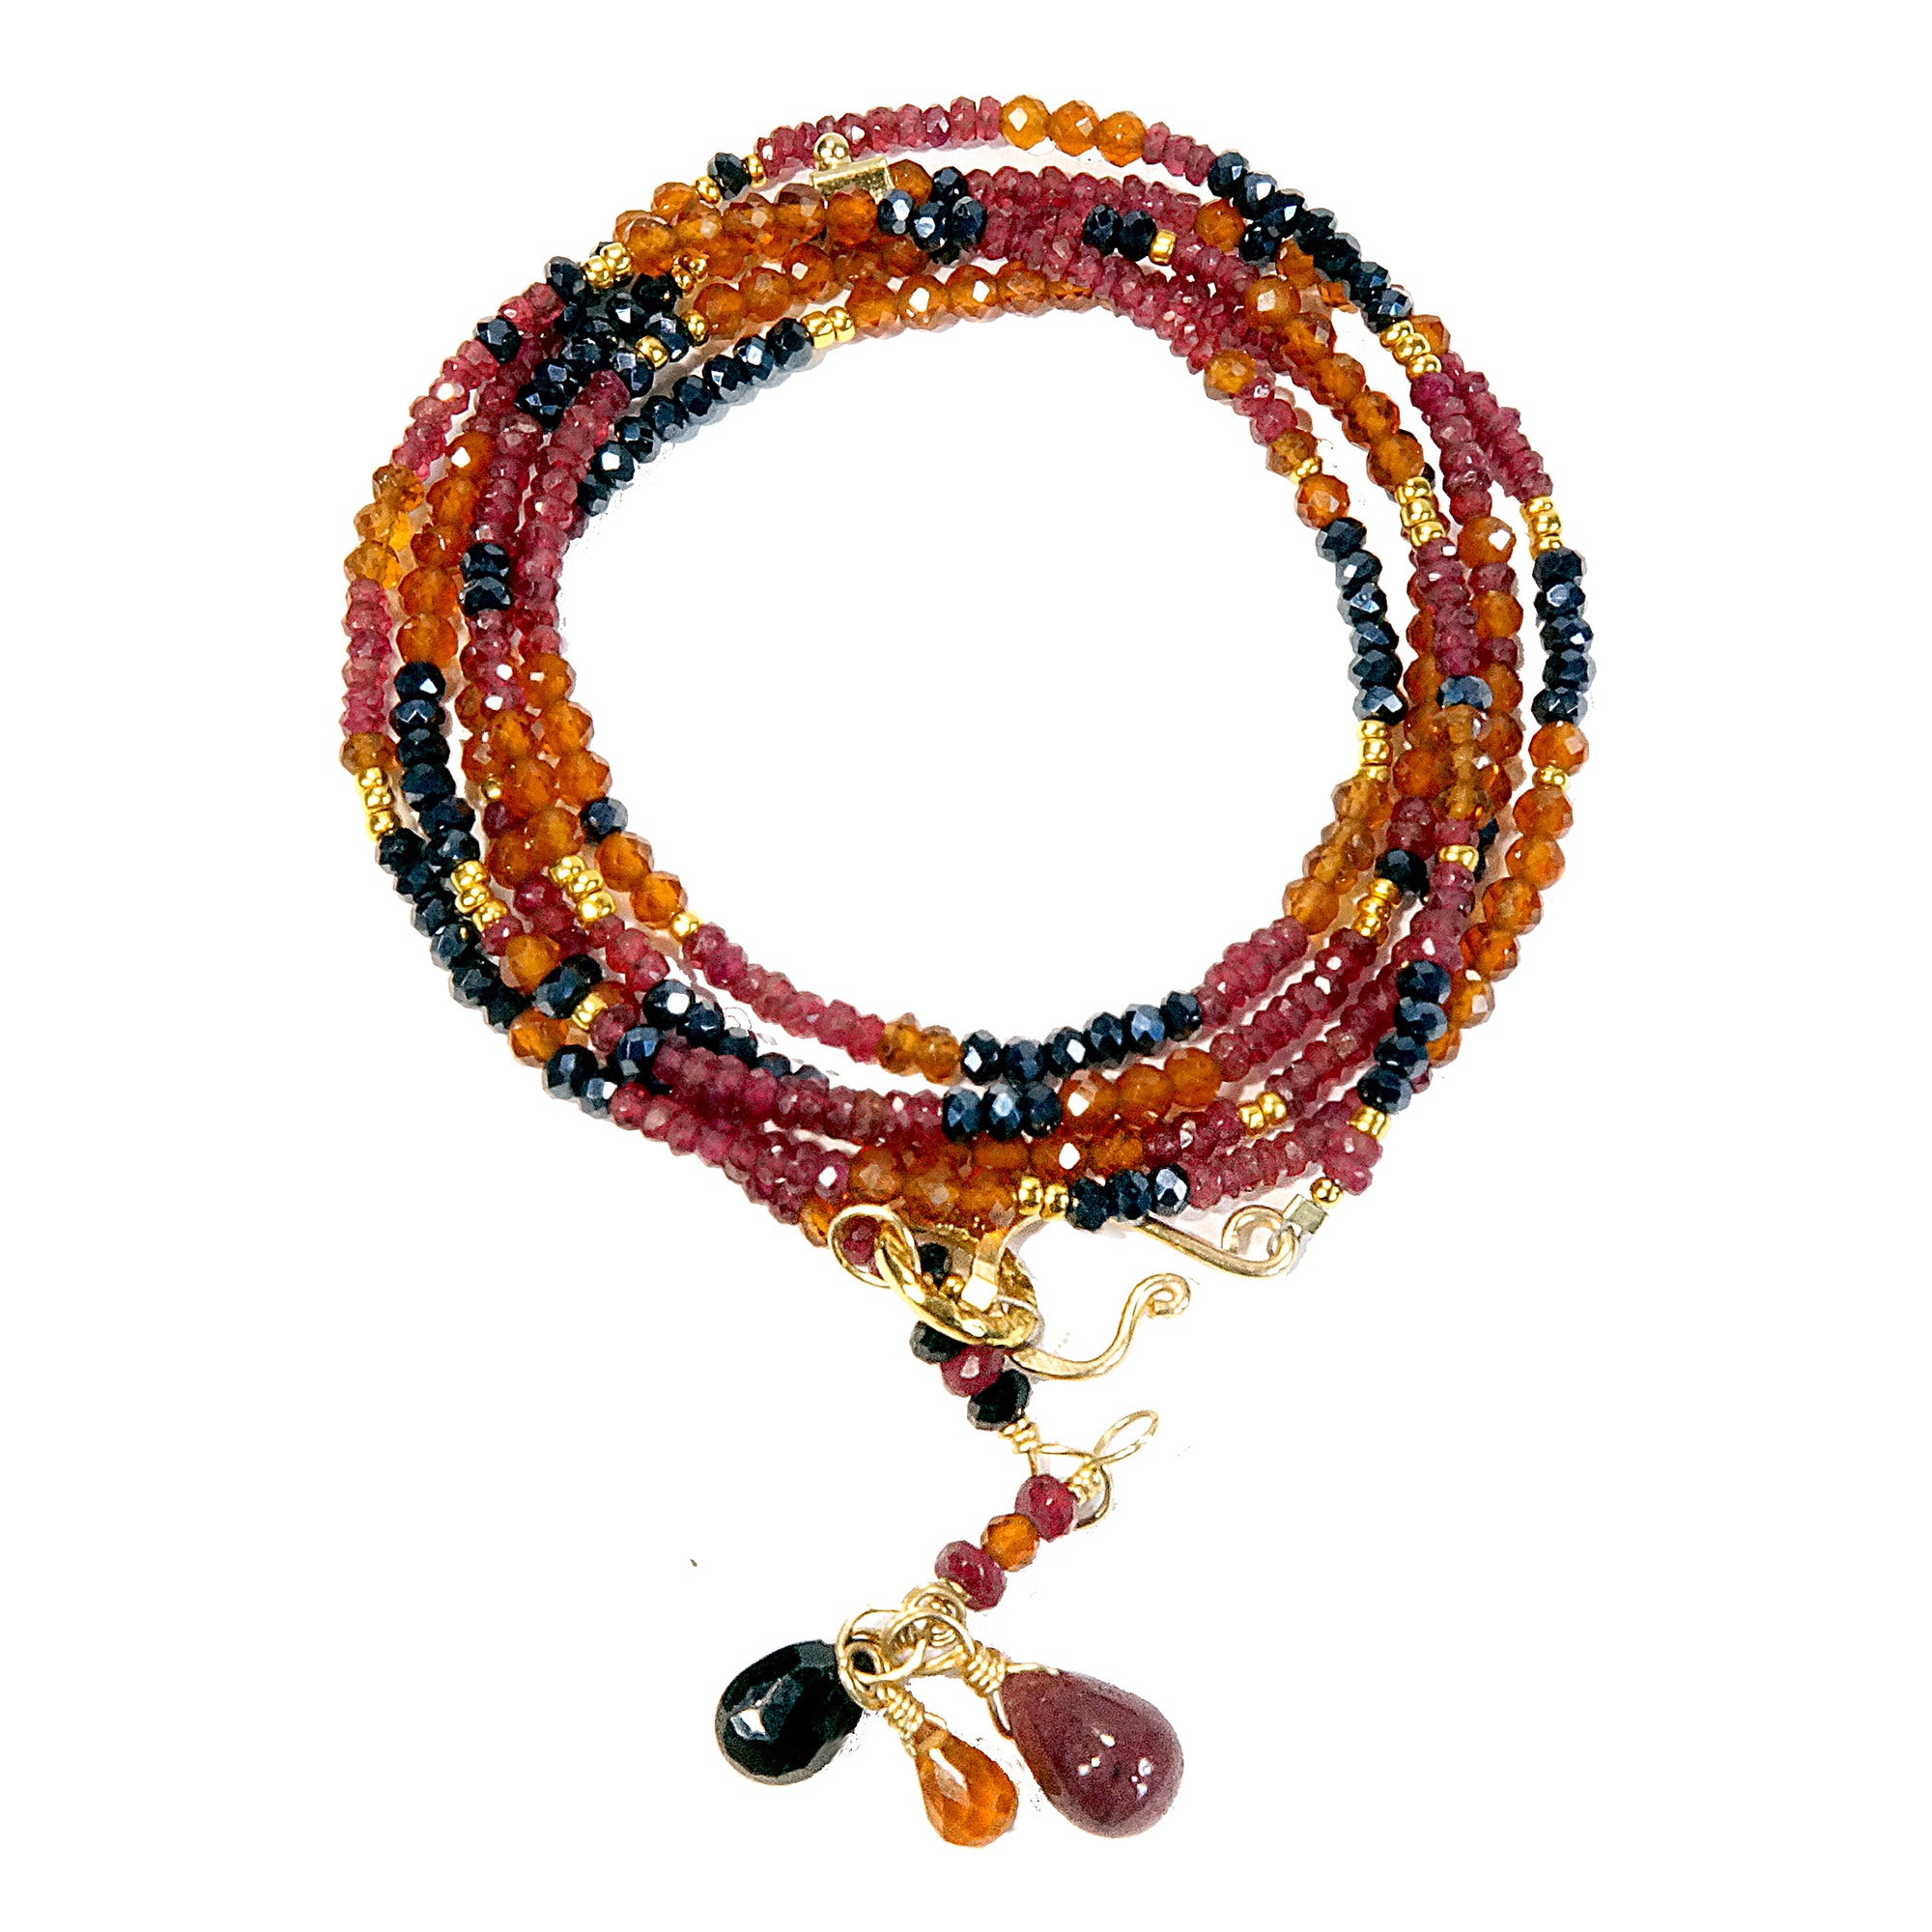 Multi Gemstone Gold Necklace/Wrapped Bracelet with Spinel, Hessonite, Ruby - Long